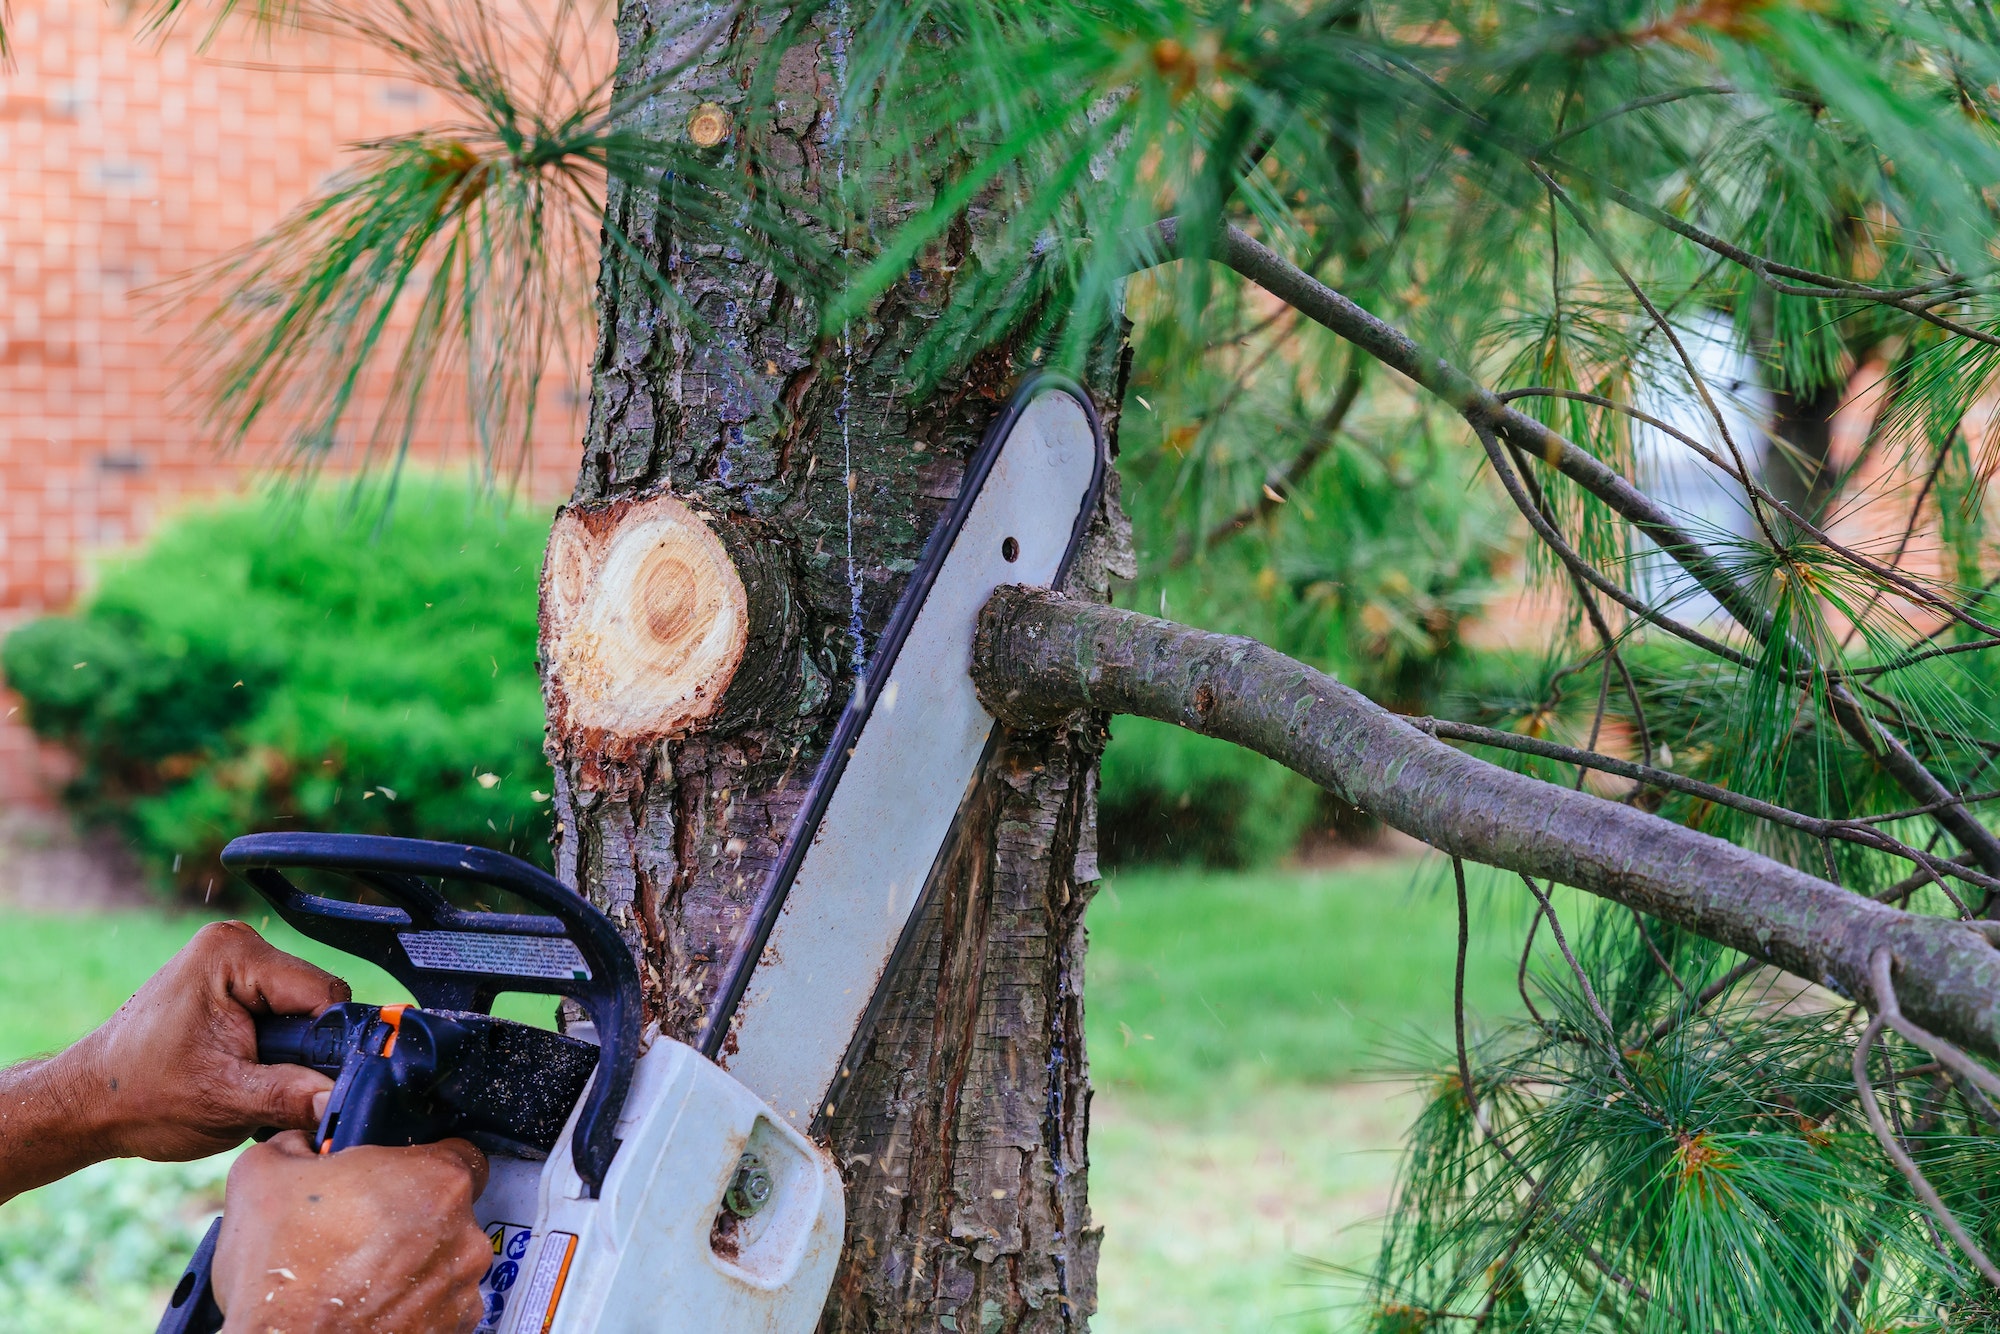 professional-is-cutting-trees-using-a-chainsaw-cutting-trees-with-saw.jpg